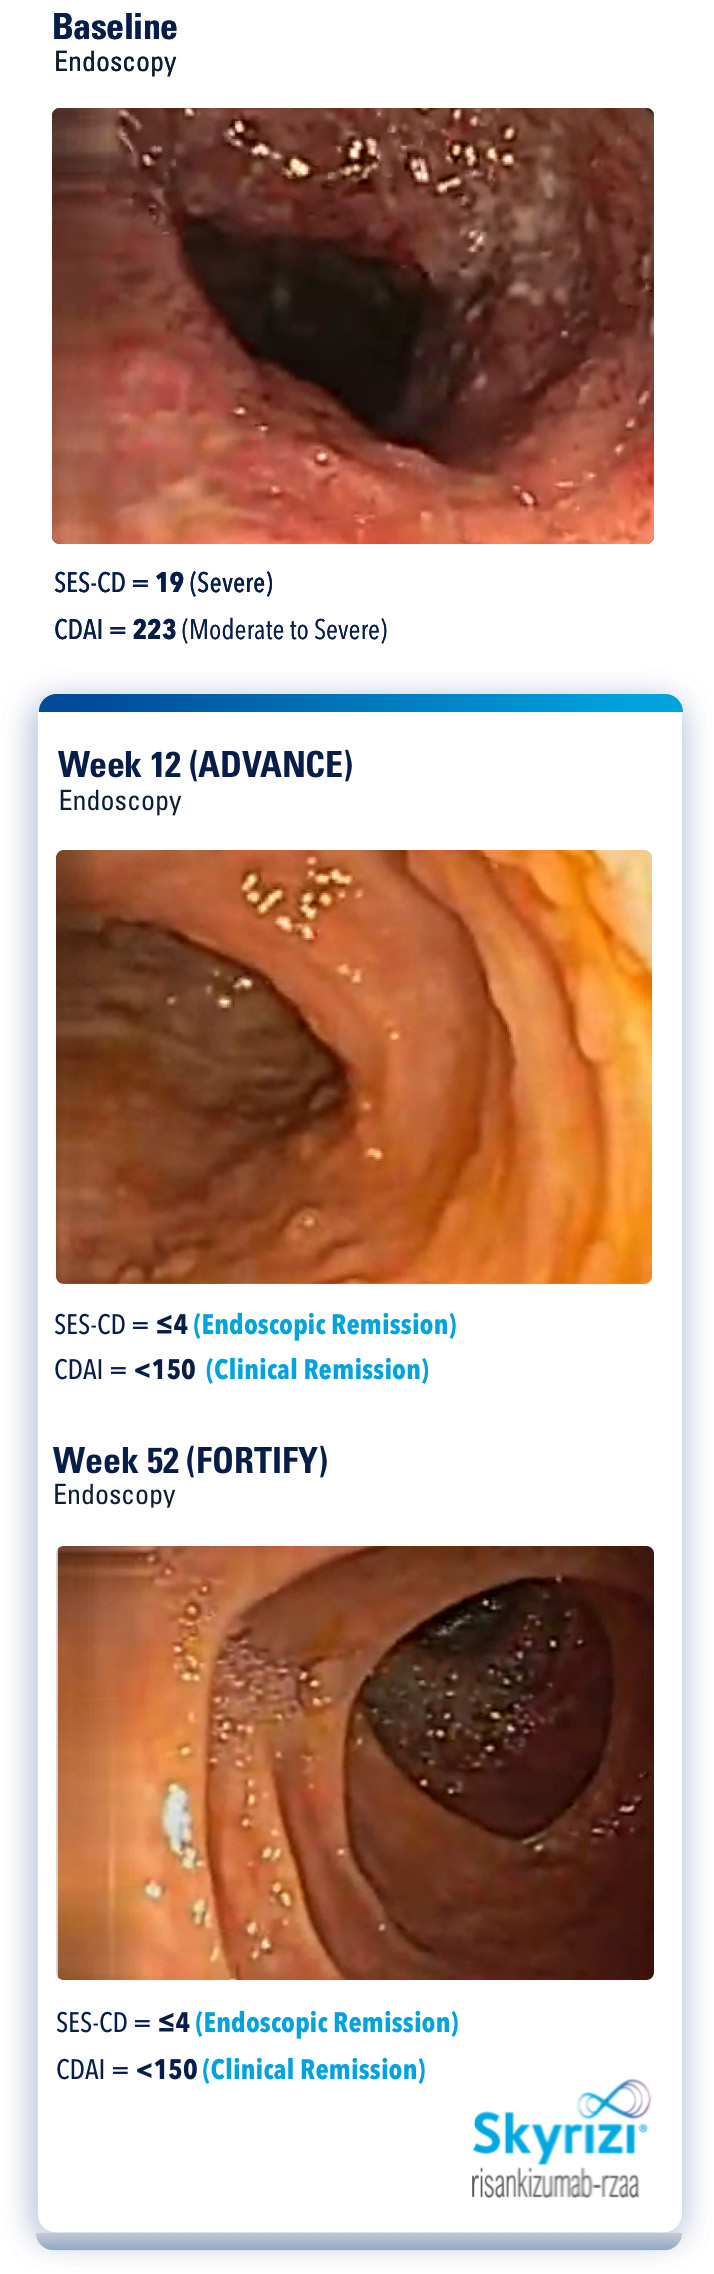 Patient 2: bio-naïve and presented with a moderate CD on endoscopy at weeks 12 and 52